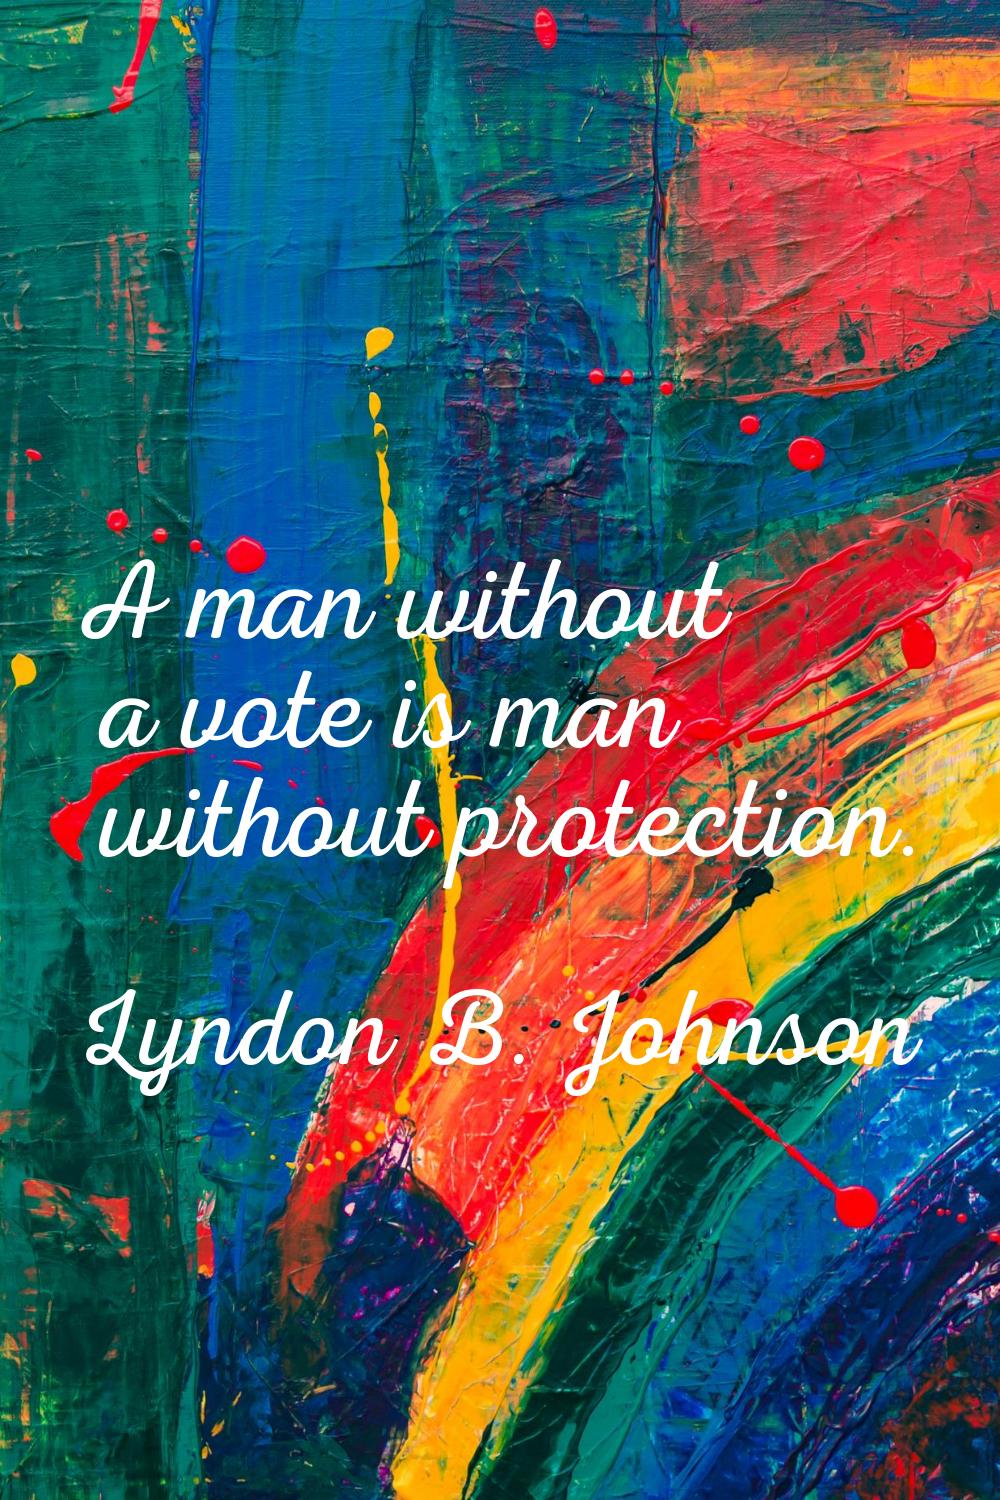 A man without a vote is man without protection.